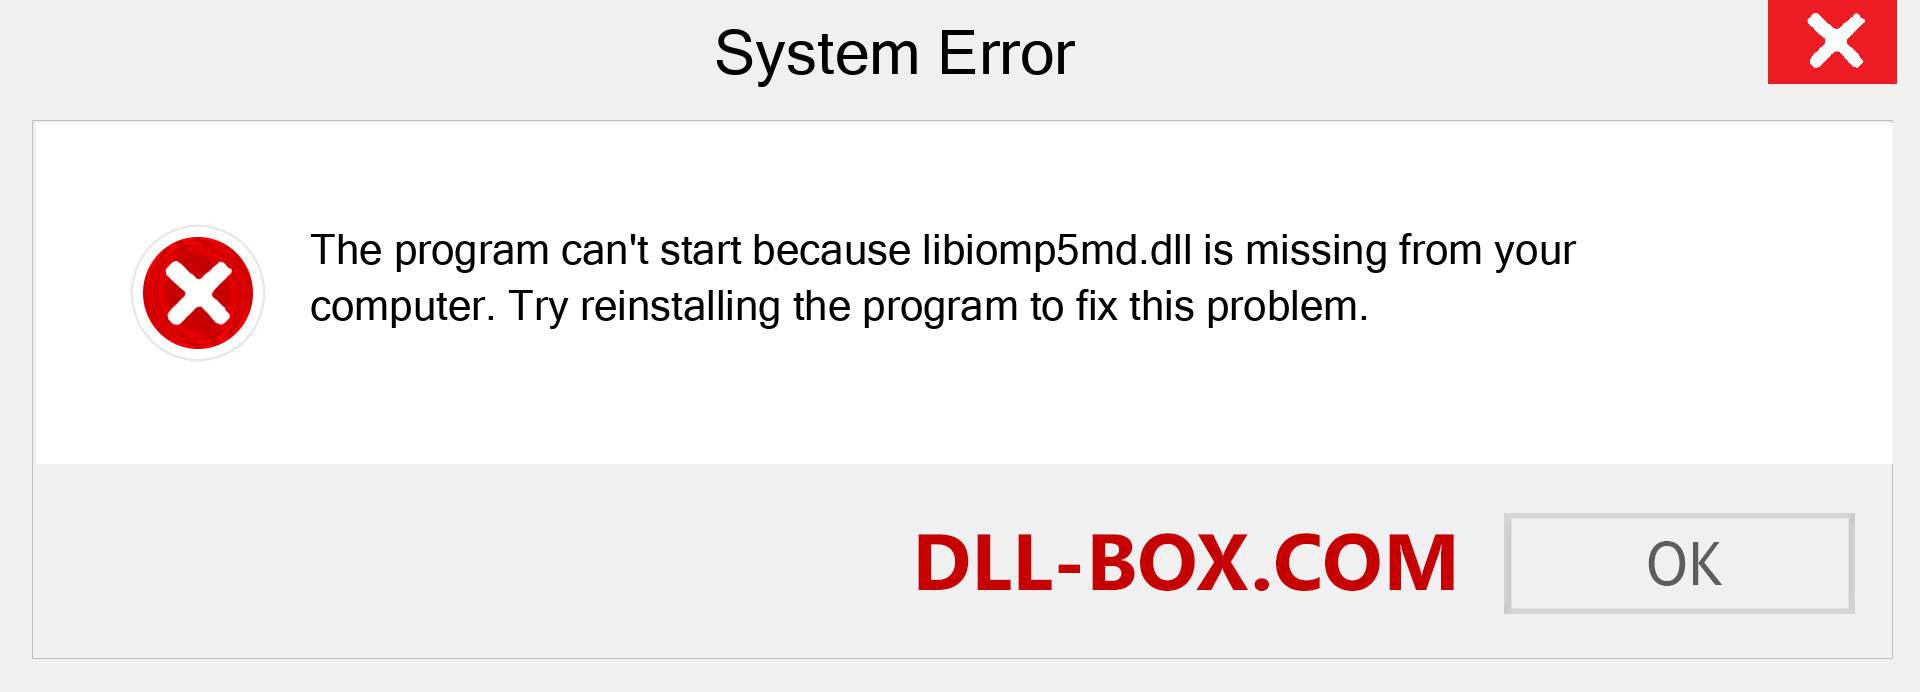  libiomp5md.dll file is missing?. Download for Windows 7, 8, 10 - Fix  libiomp5md dll Missing Error on Windows, photos, images